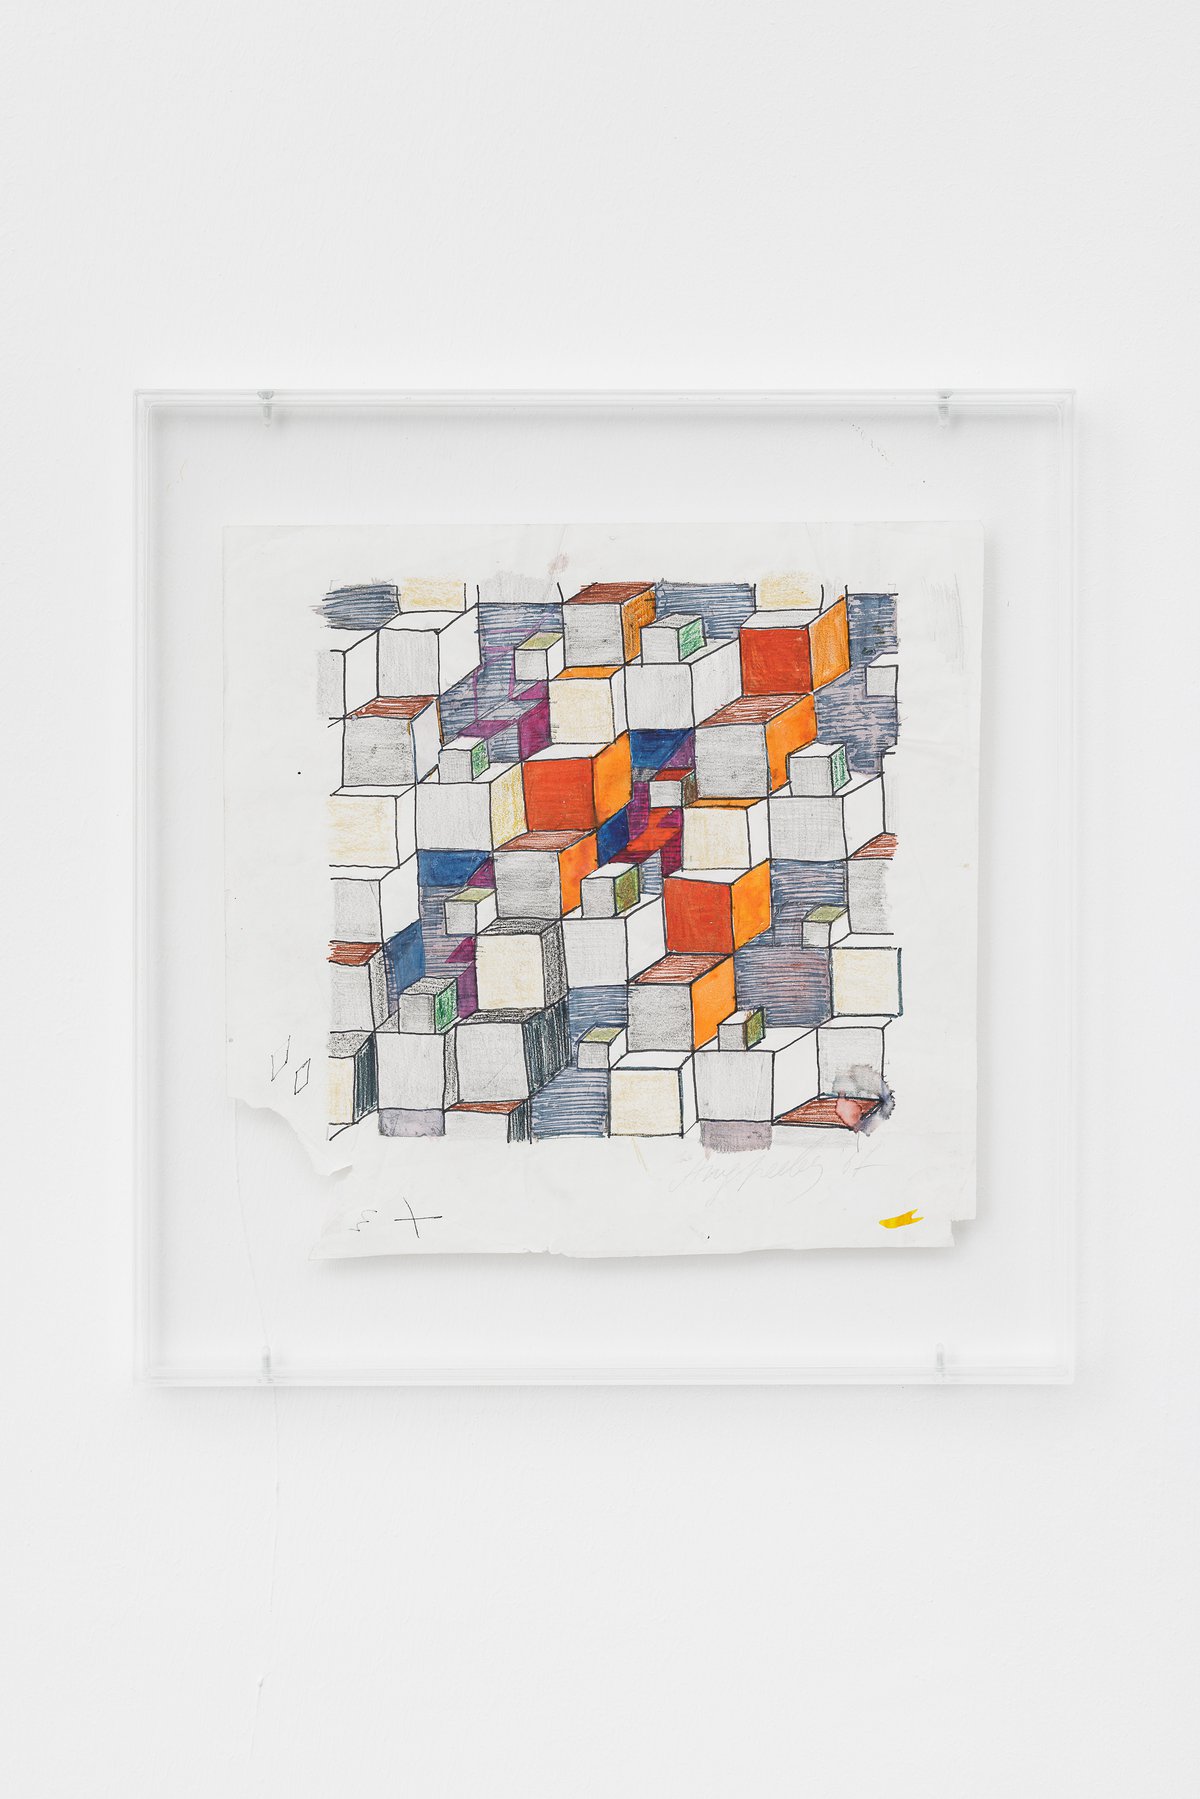 Anna AndreevaPreliminary Sketch, 1967Gouache and pencil on paper36 x 38 cm (framed)